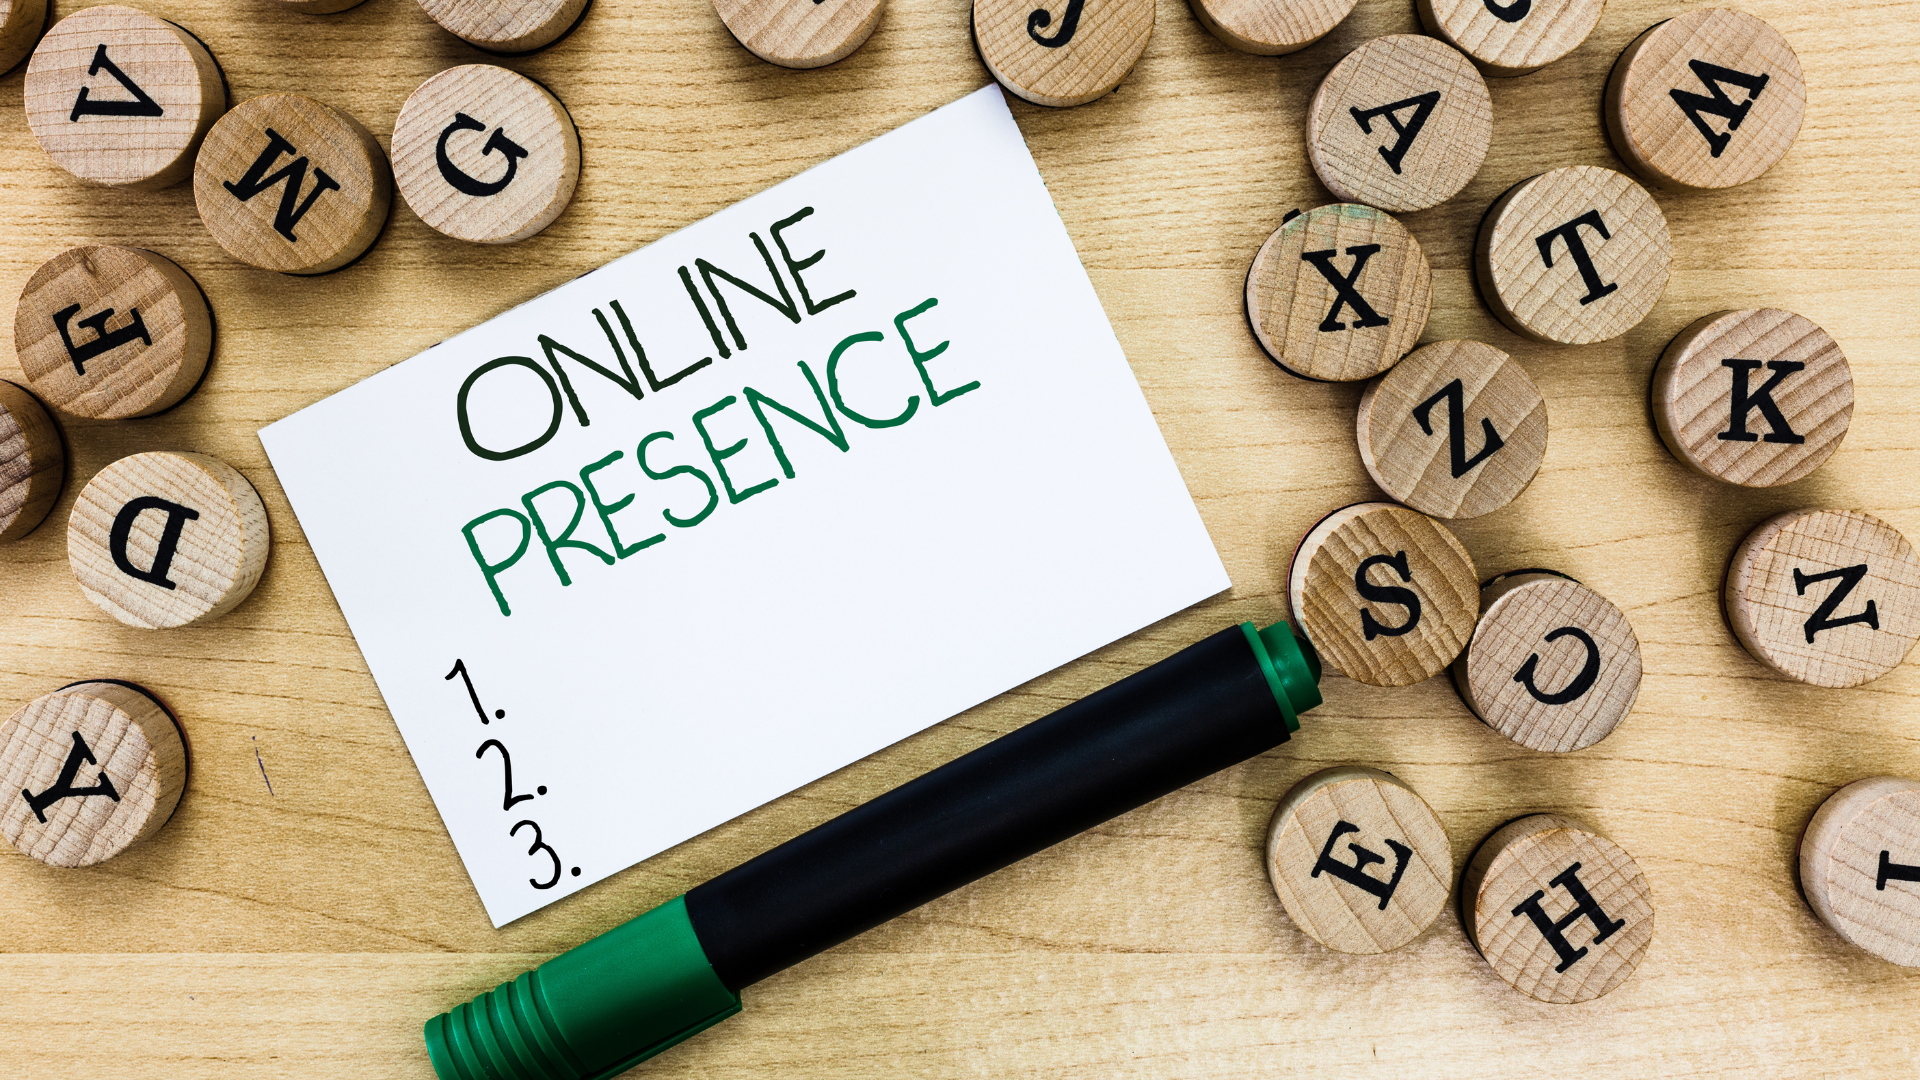 How to build online presence